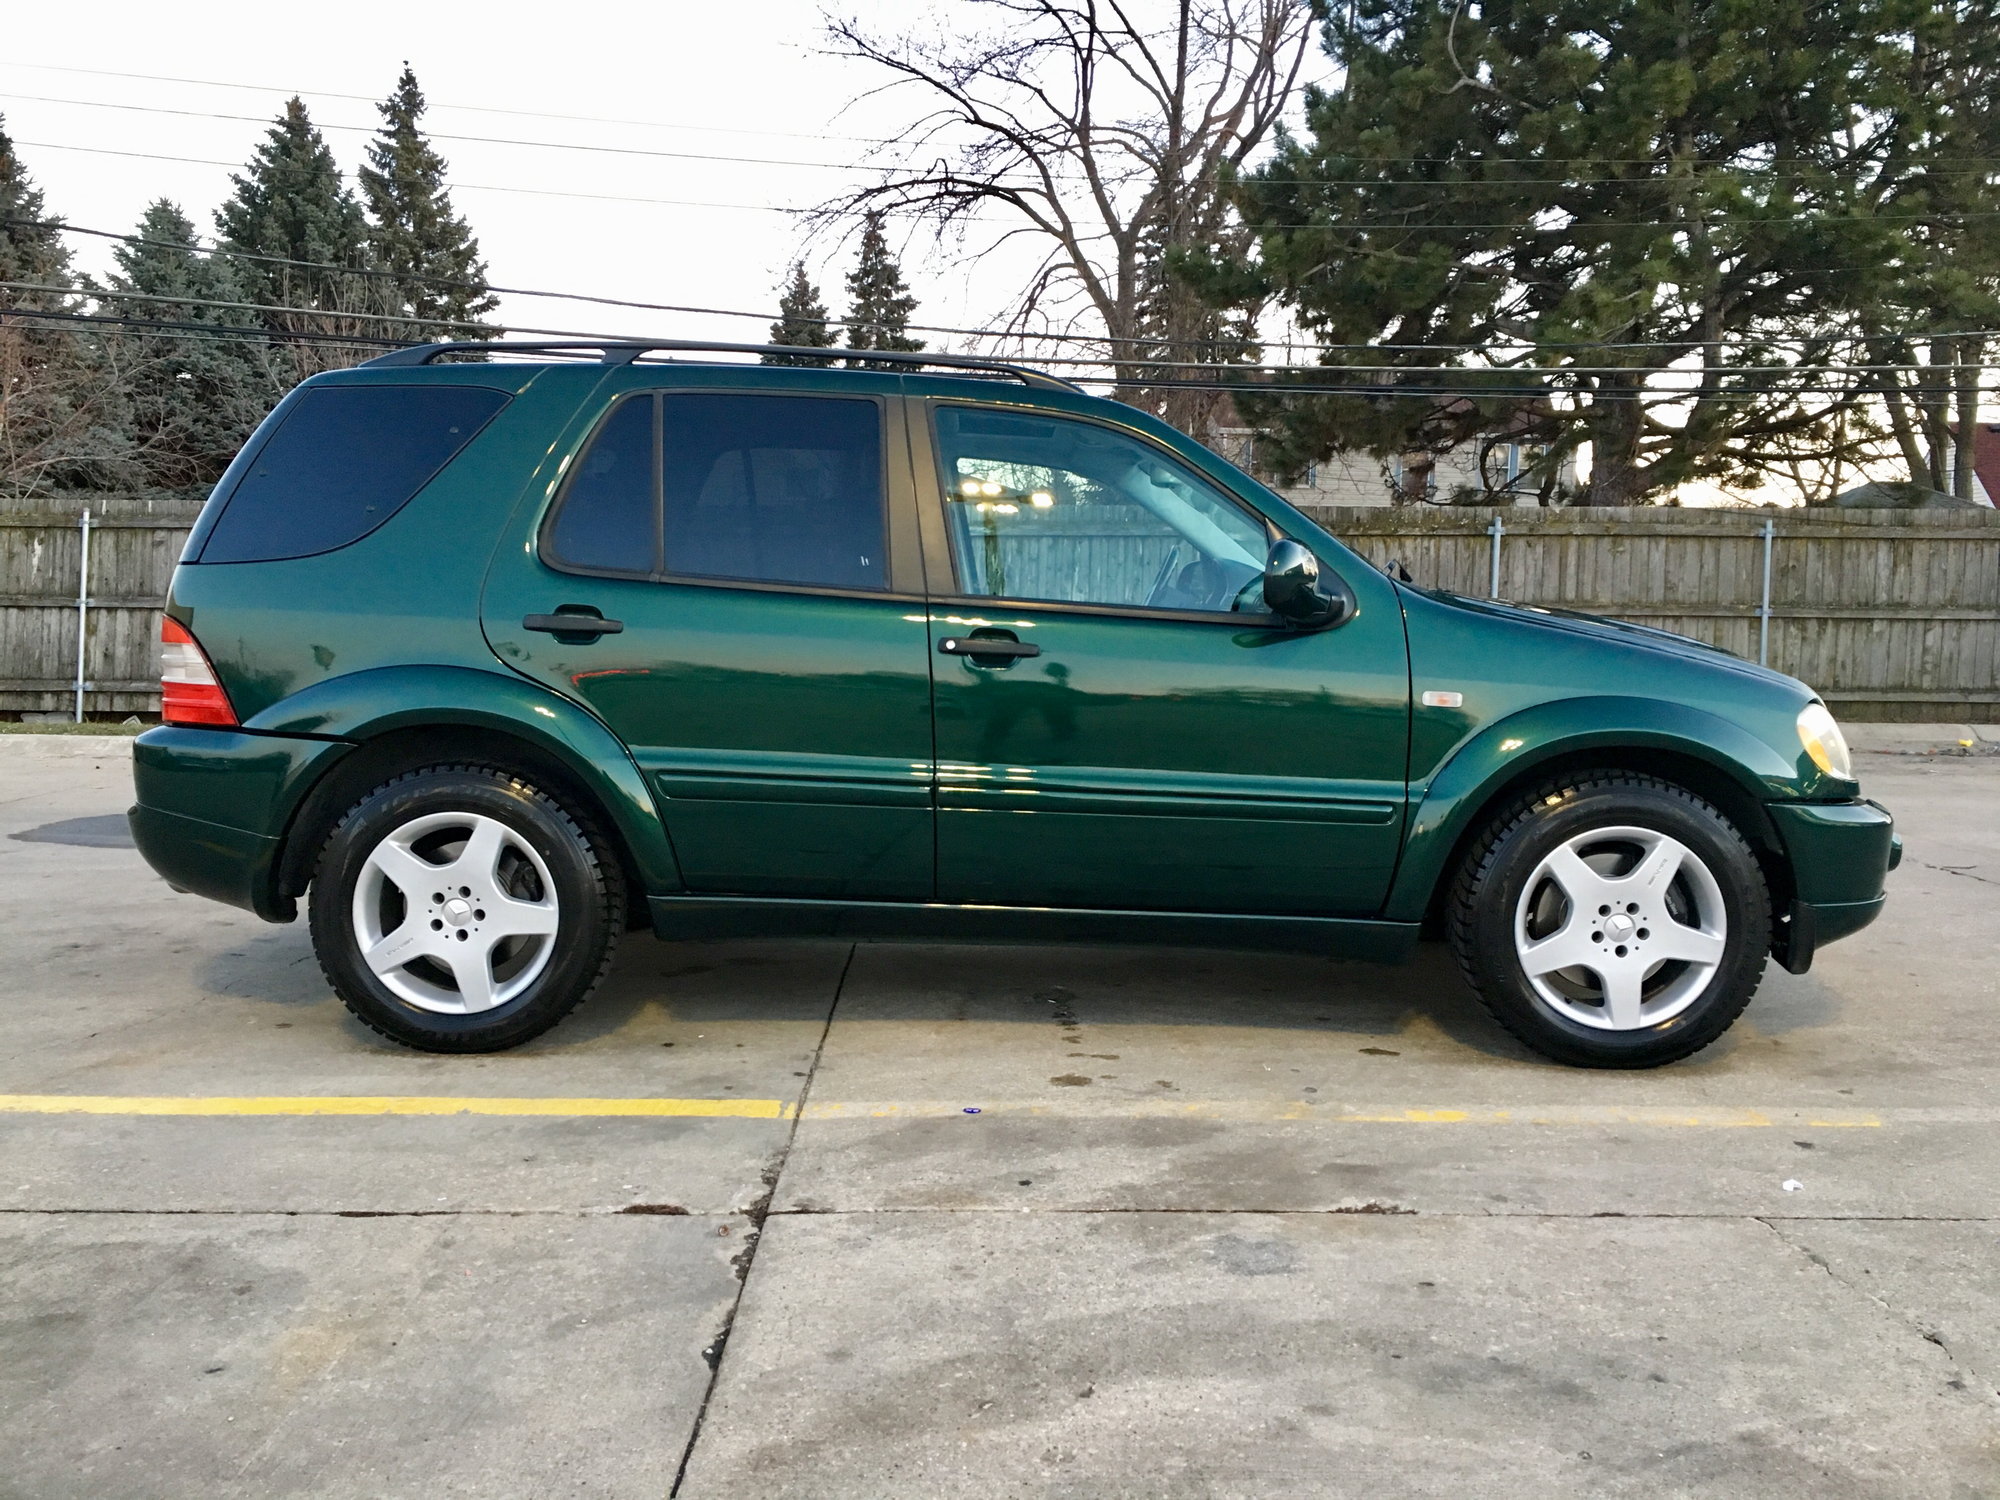 2001 Mercedes-Benz ML55 AMG - 2001 ML55 AMG. Low Miles. CALI Truck no Rust! Green/Black - Used - VIN 4JGAB74E01A227144 - 88,331 Miles - 8 cyl - AWD - Automatic - SUV - Other - Chicago, IL 60618, United States